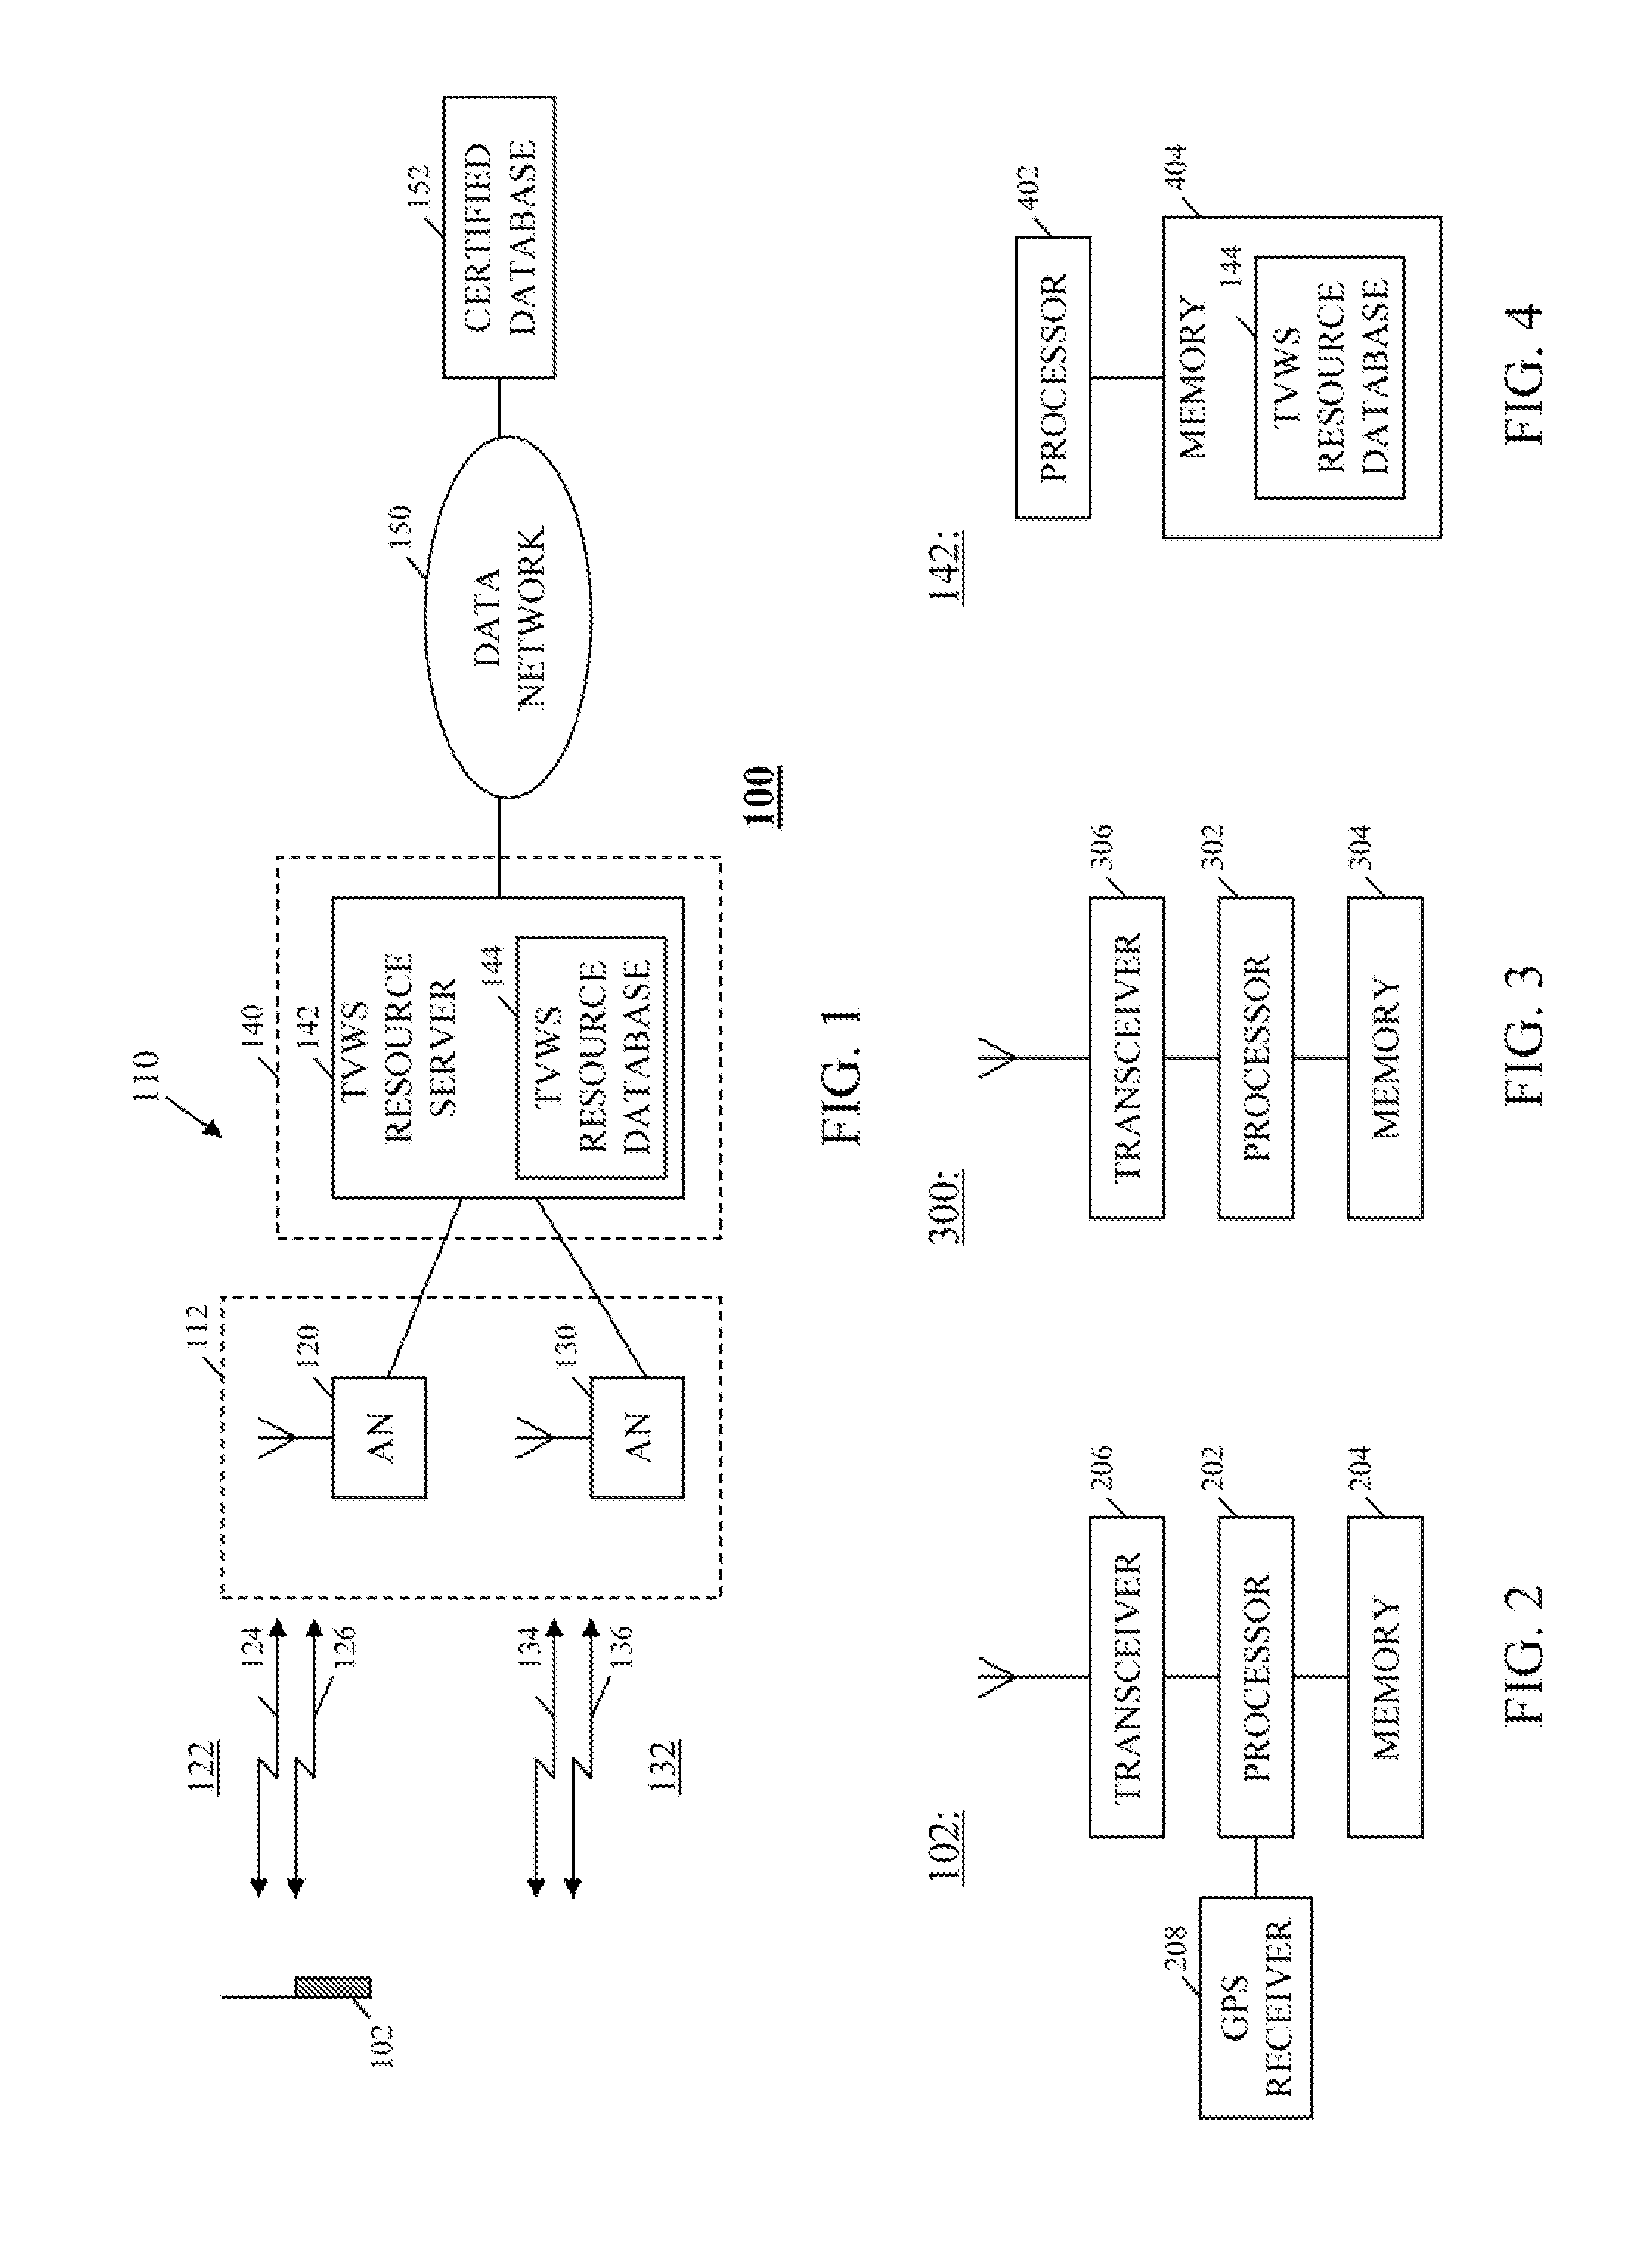 Method and apparatus for providing user equipment access to TV white space resources by a broadband cellular network